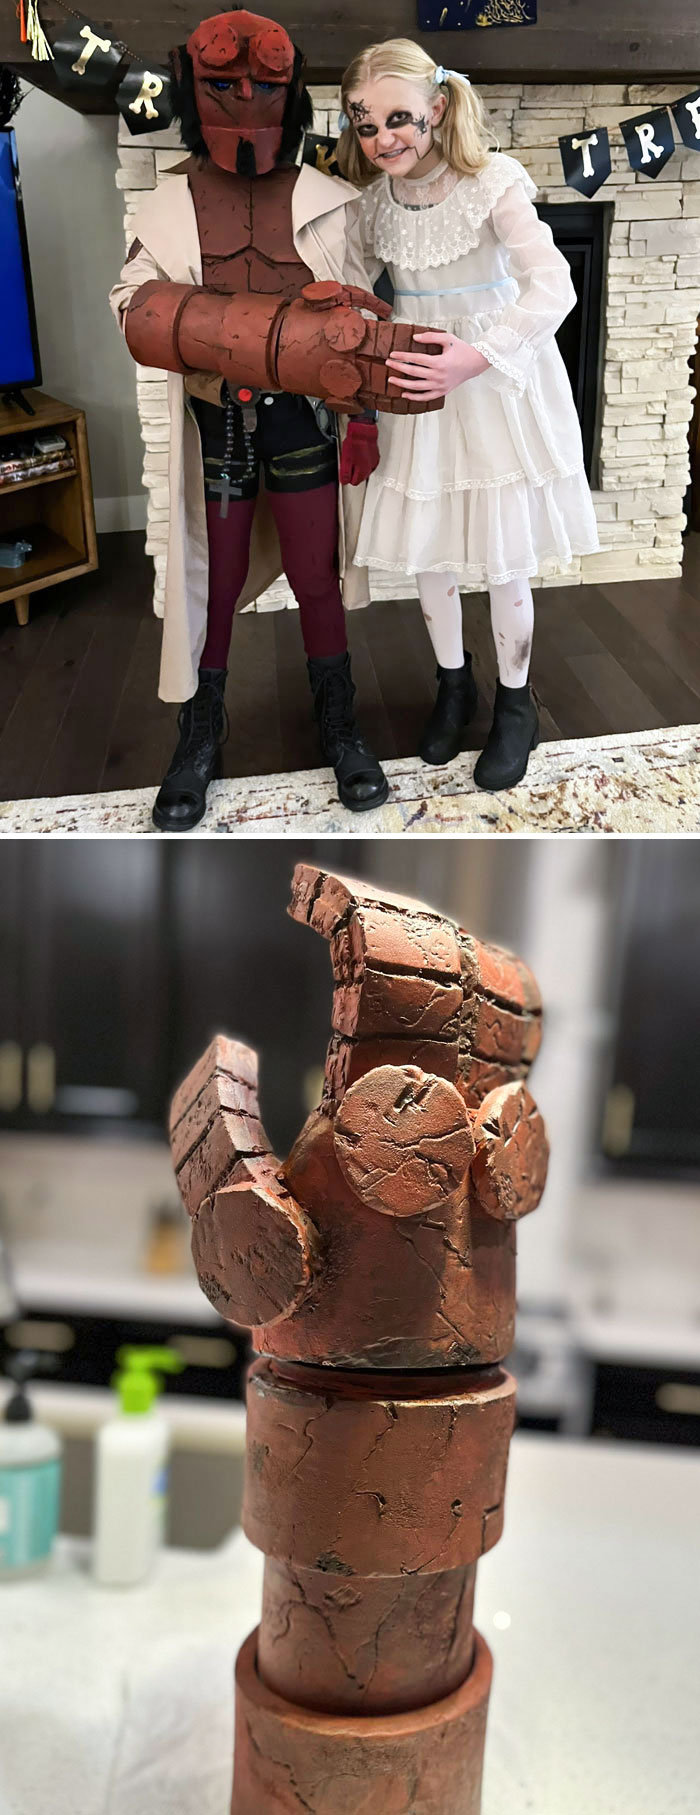 My Son Asked To Be Hellboy For Halloween. Utter Fun To Put It Together With My Wife And Mother-In-Law